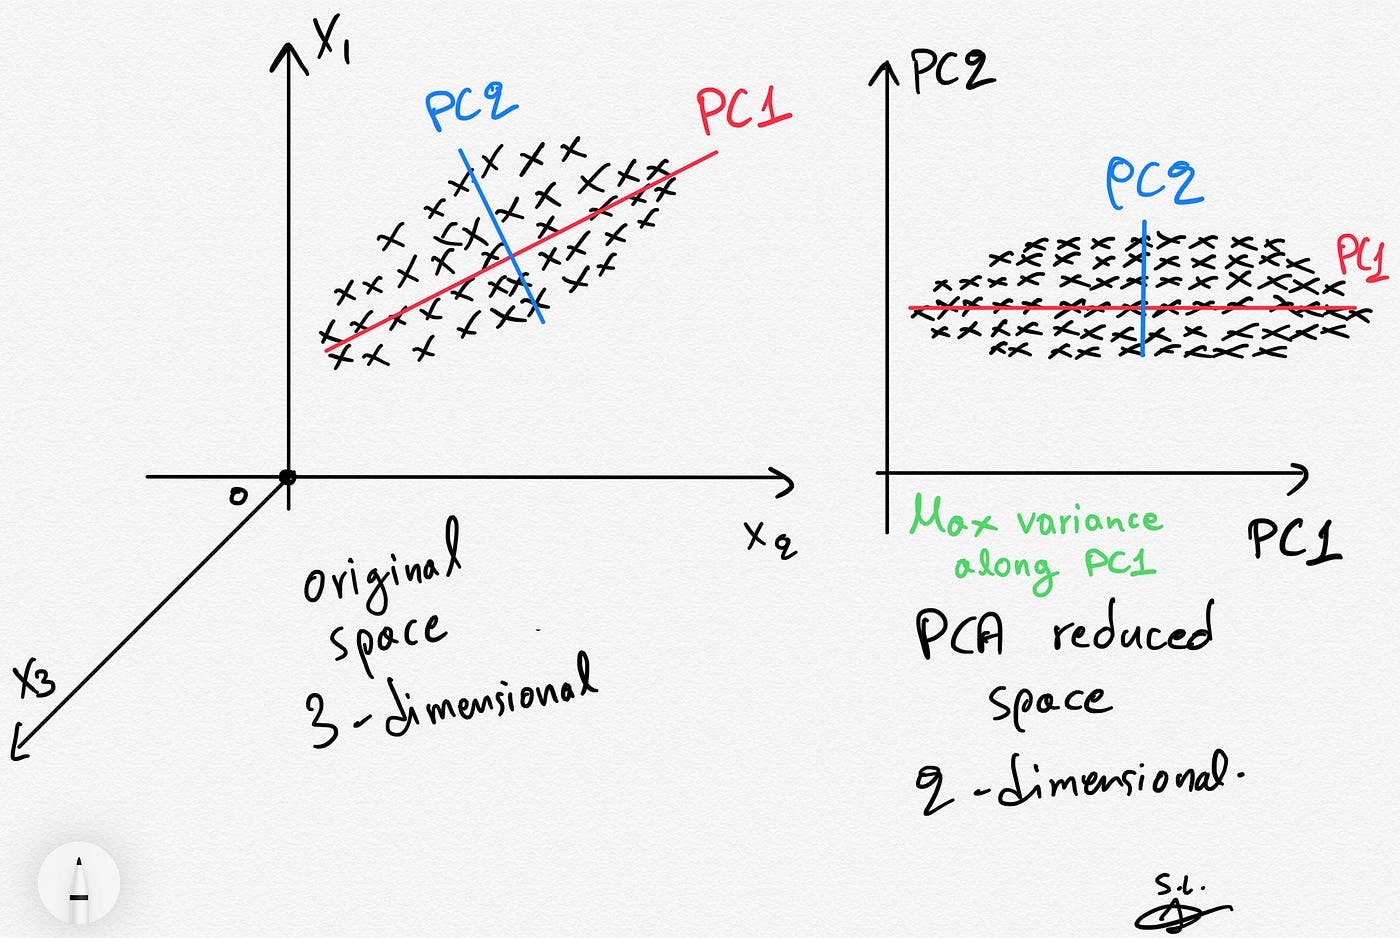 PCA is a dimensionality reduction technique